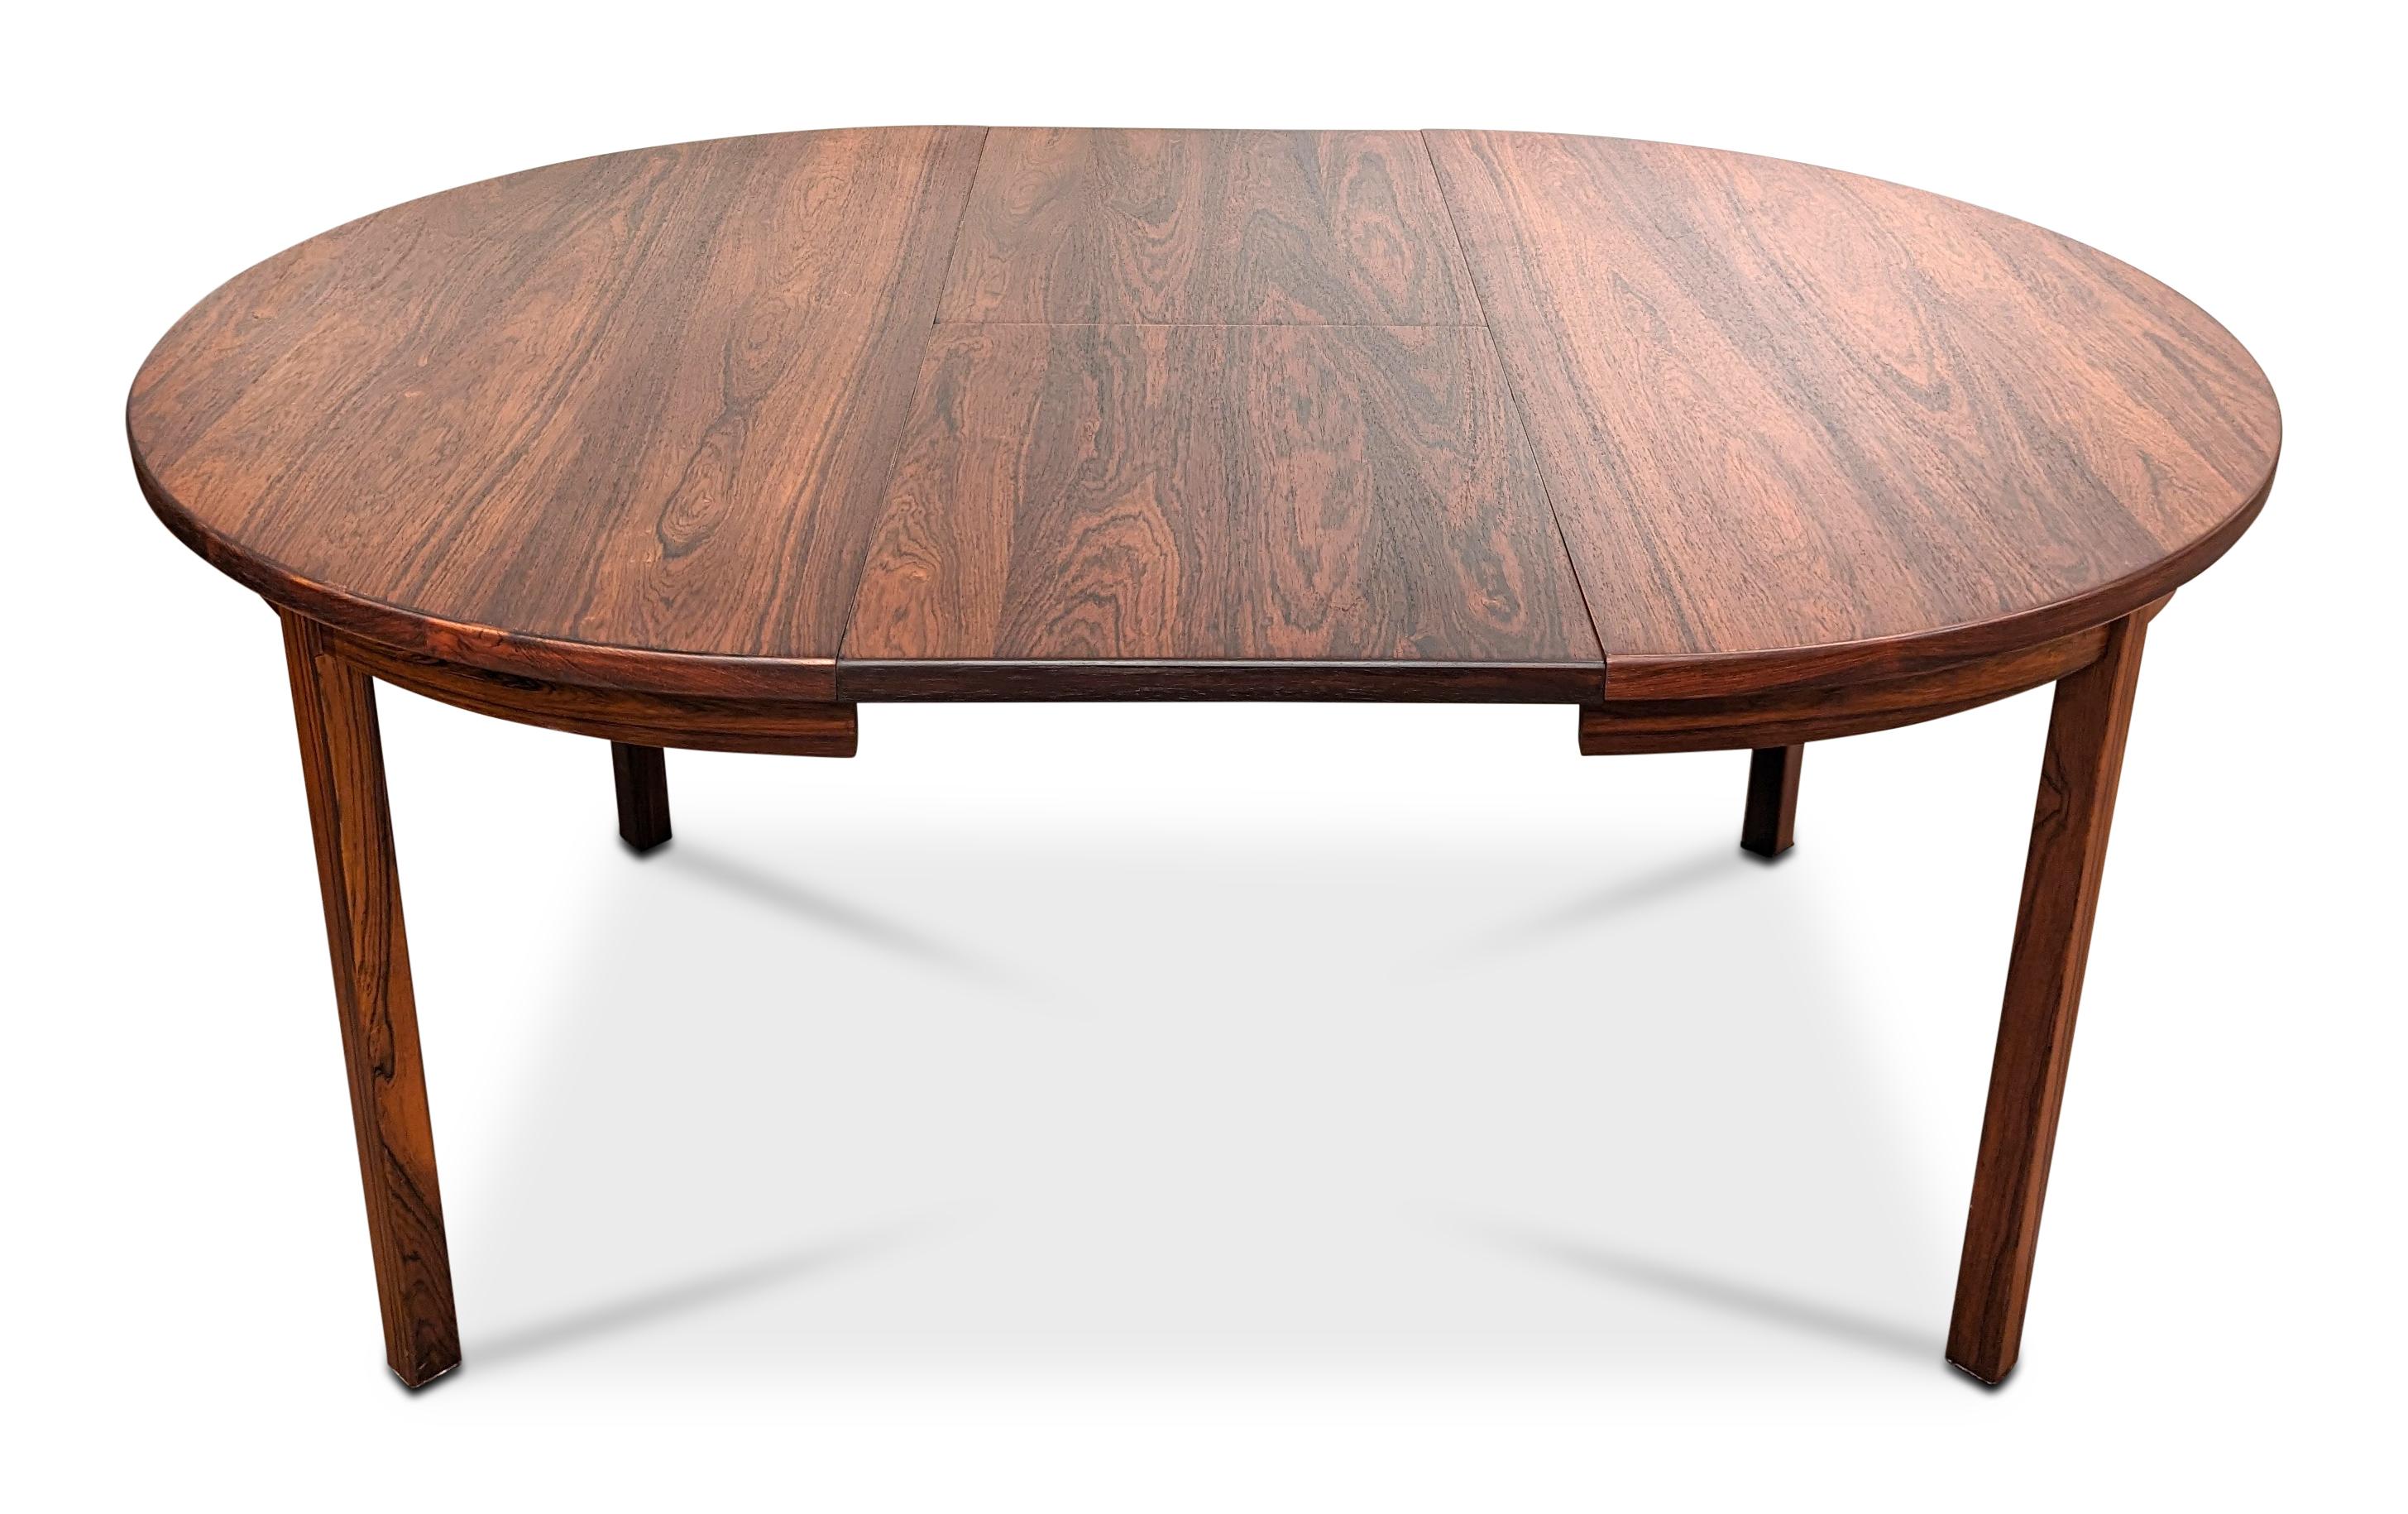 Round Rosewood Table w 2 Butterfly Leaves - 022435 Vintage Danish Modern 2